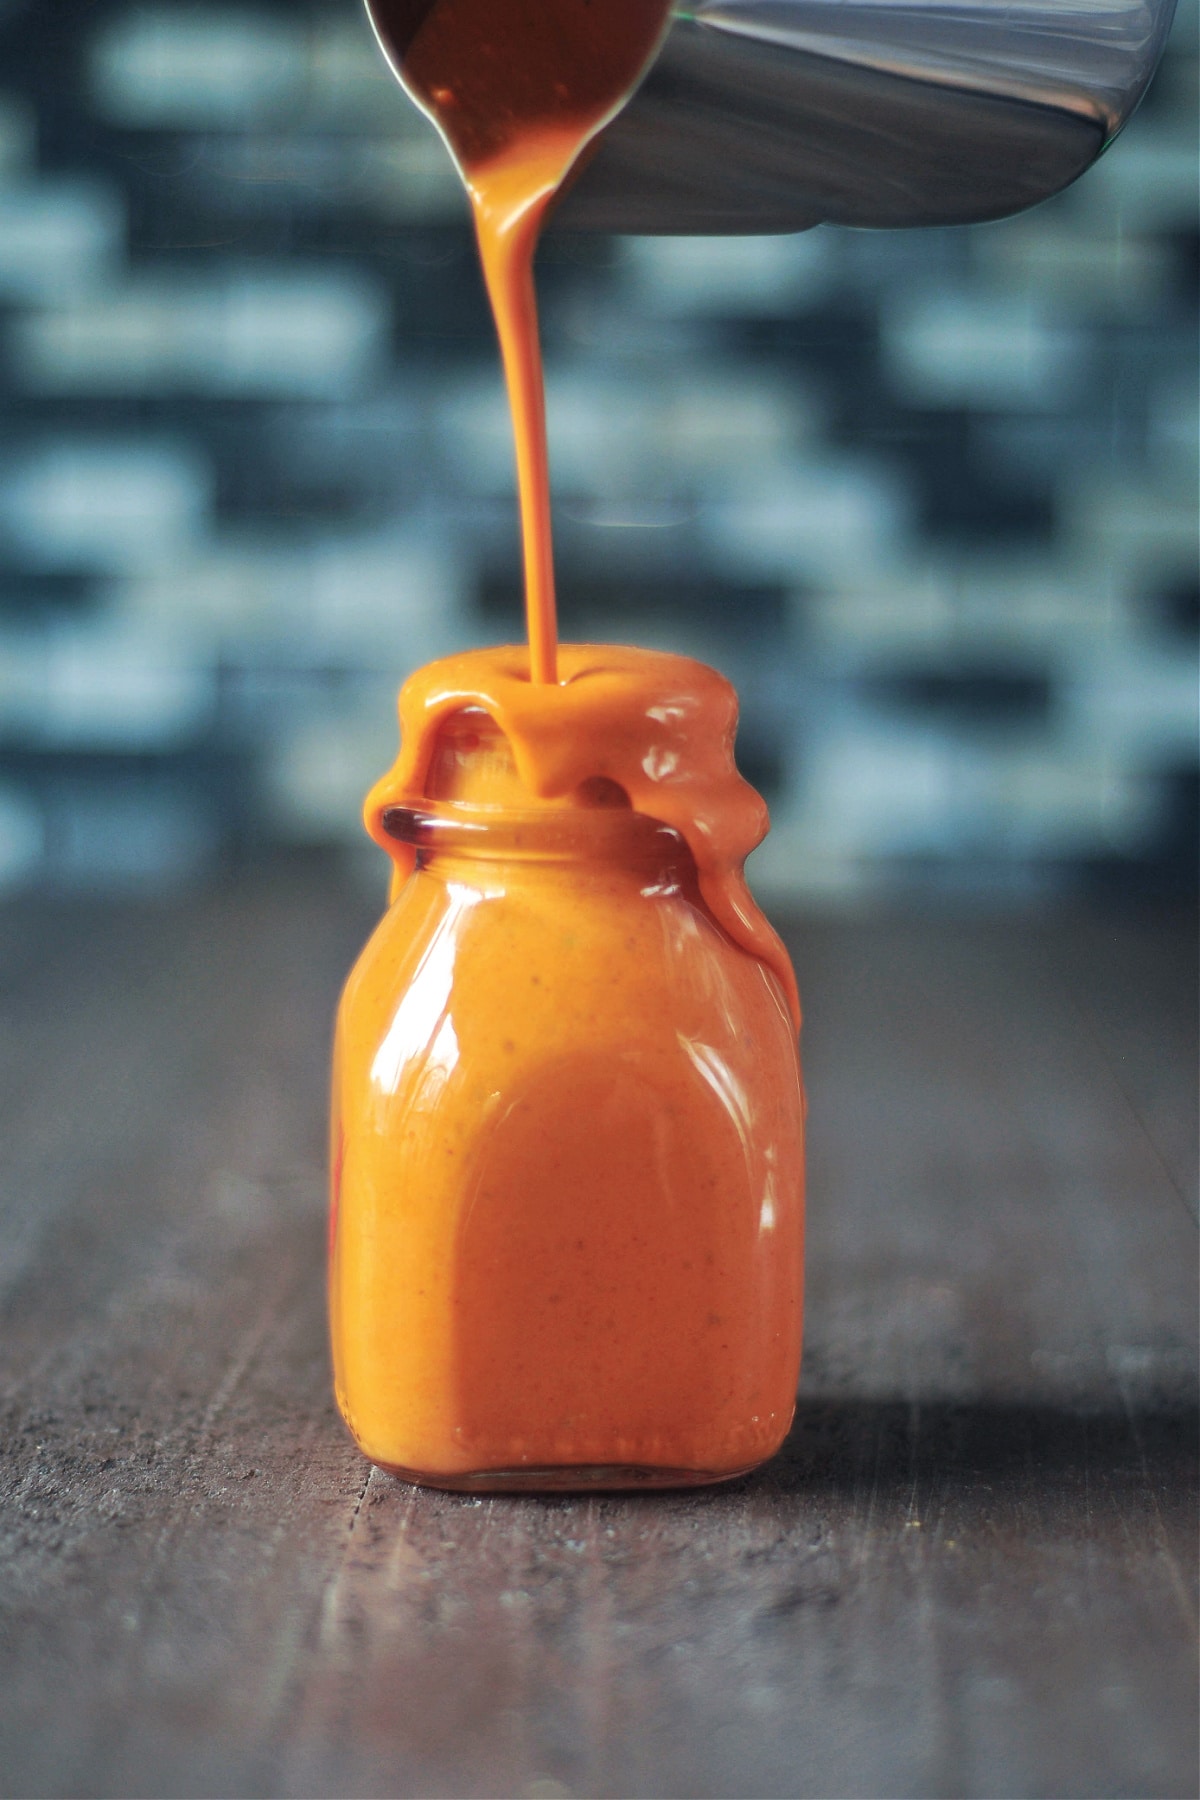 A small glass bottle with bright orange hot sauce being poured in until it is overflowing out the top. Bottle sits on a wood surface with a tile backsplash blurred in background.